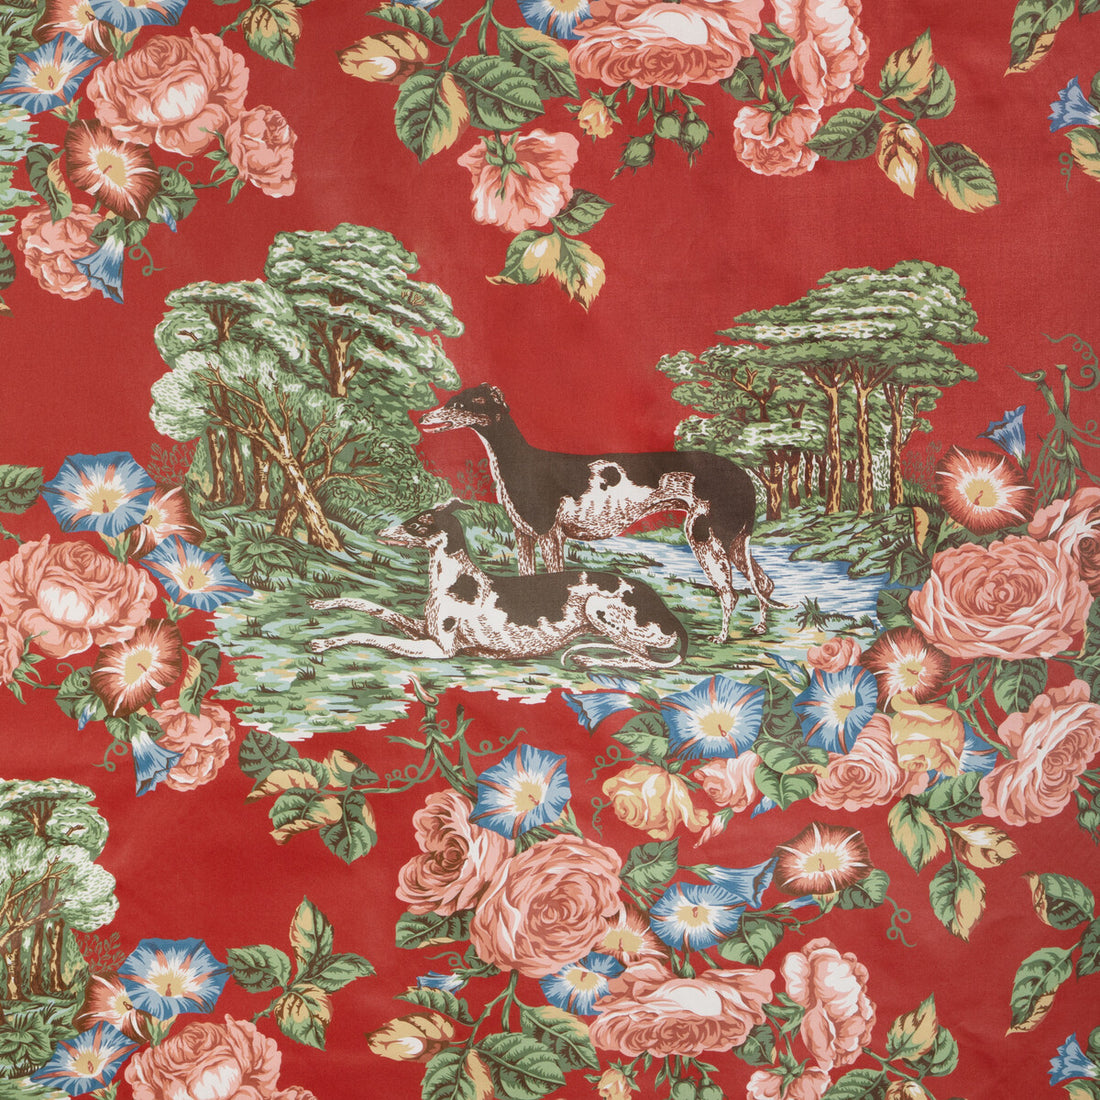 Whippets Cotton fabric in red color - pattern 2023125.19.0 - by Lee Jofa in the Lee Jofa 200 collection